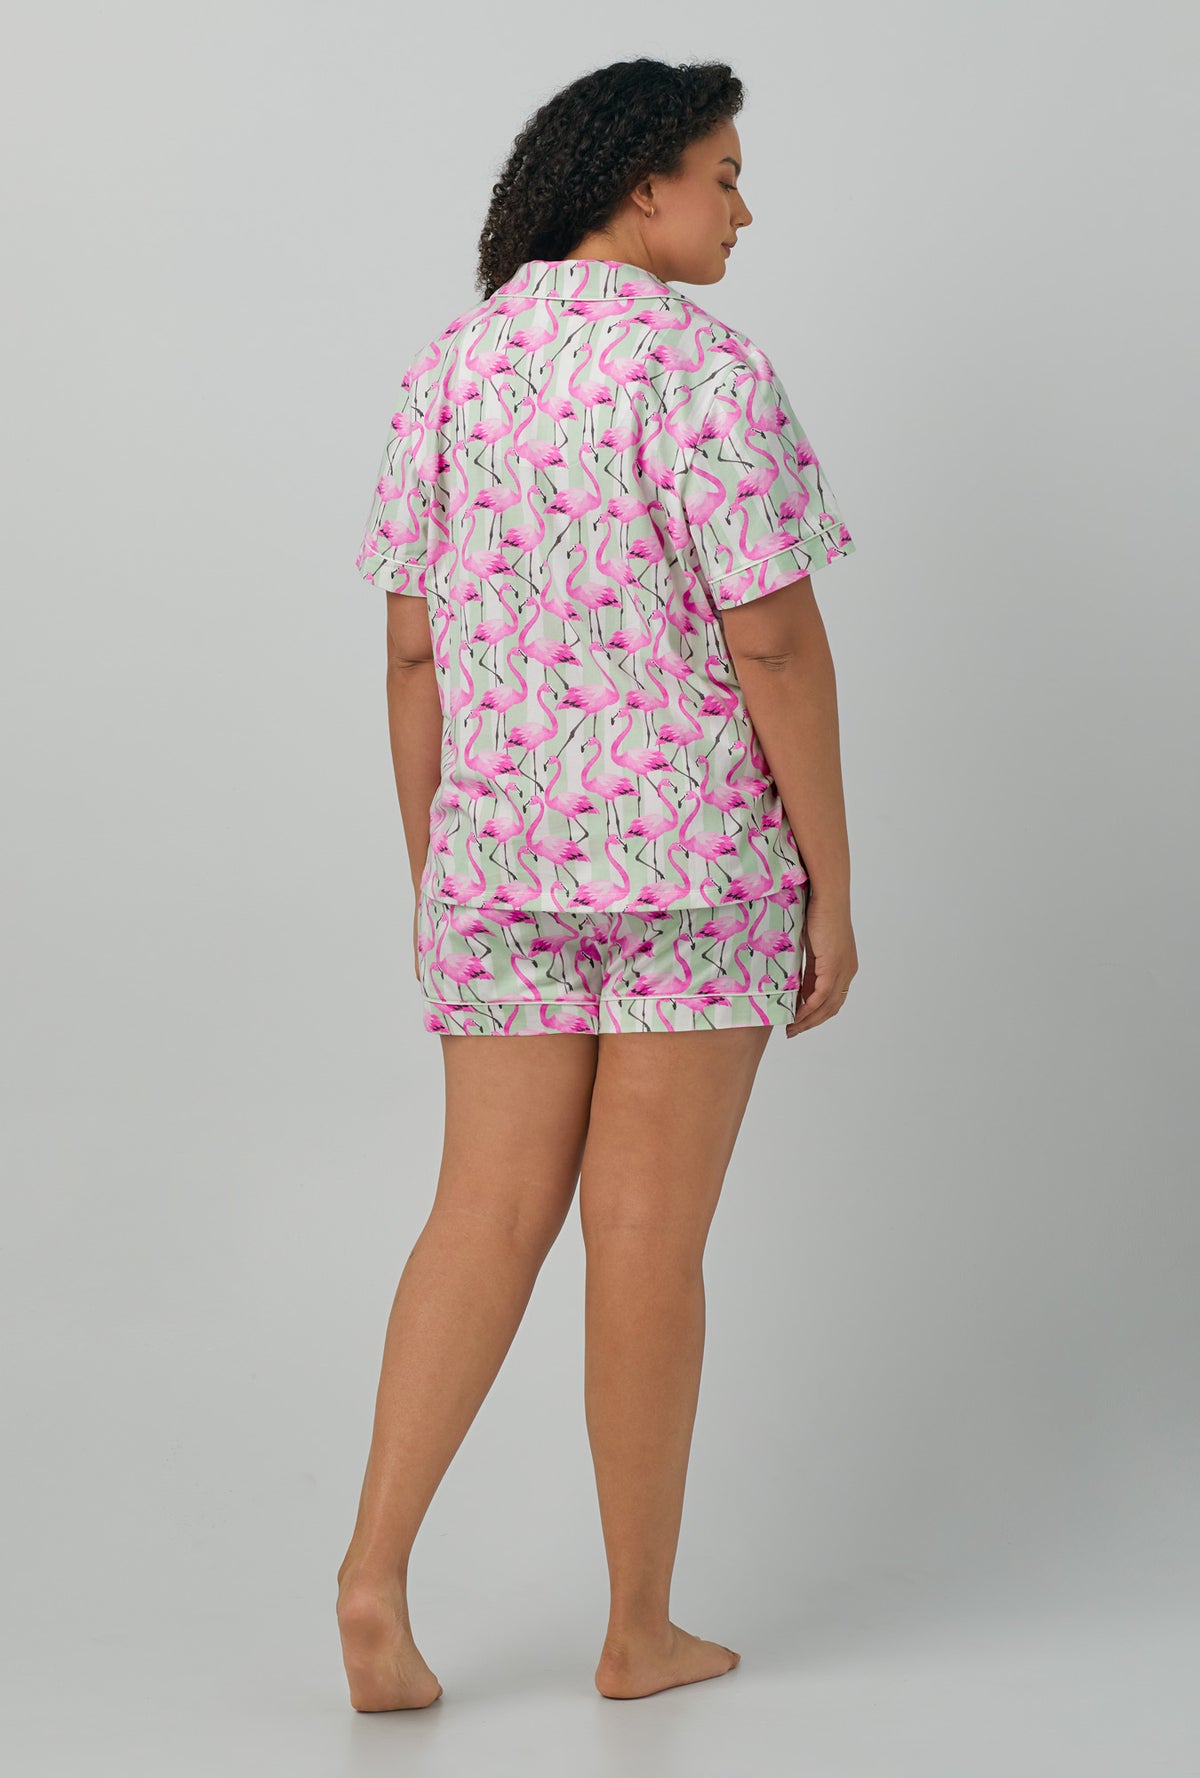 A lady wearing plus size pink Short Sleeve Classic Shorty Stretch Jersey PJ Set with Flamingo Bay print